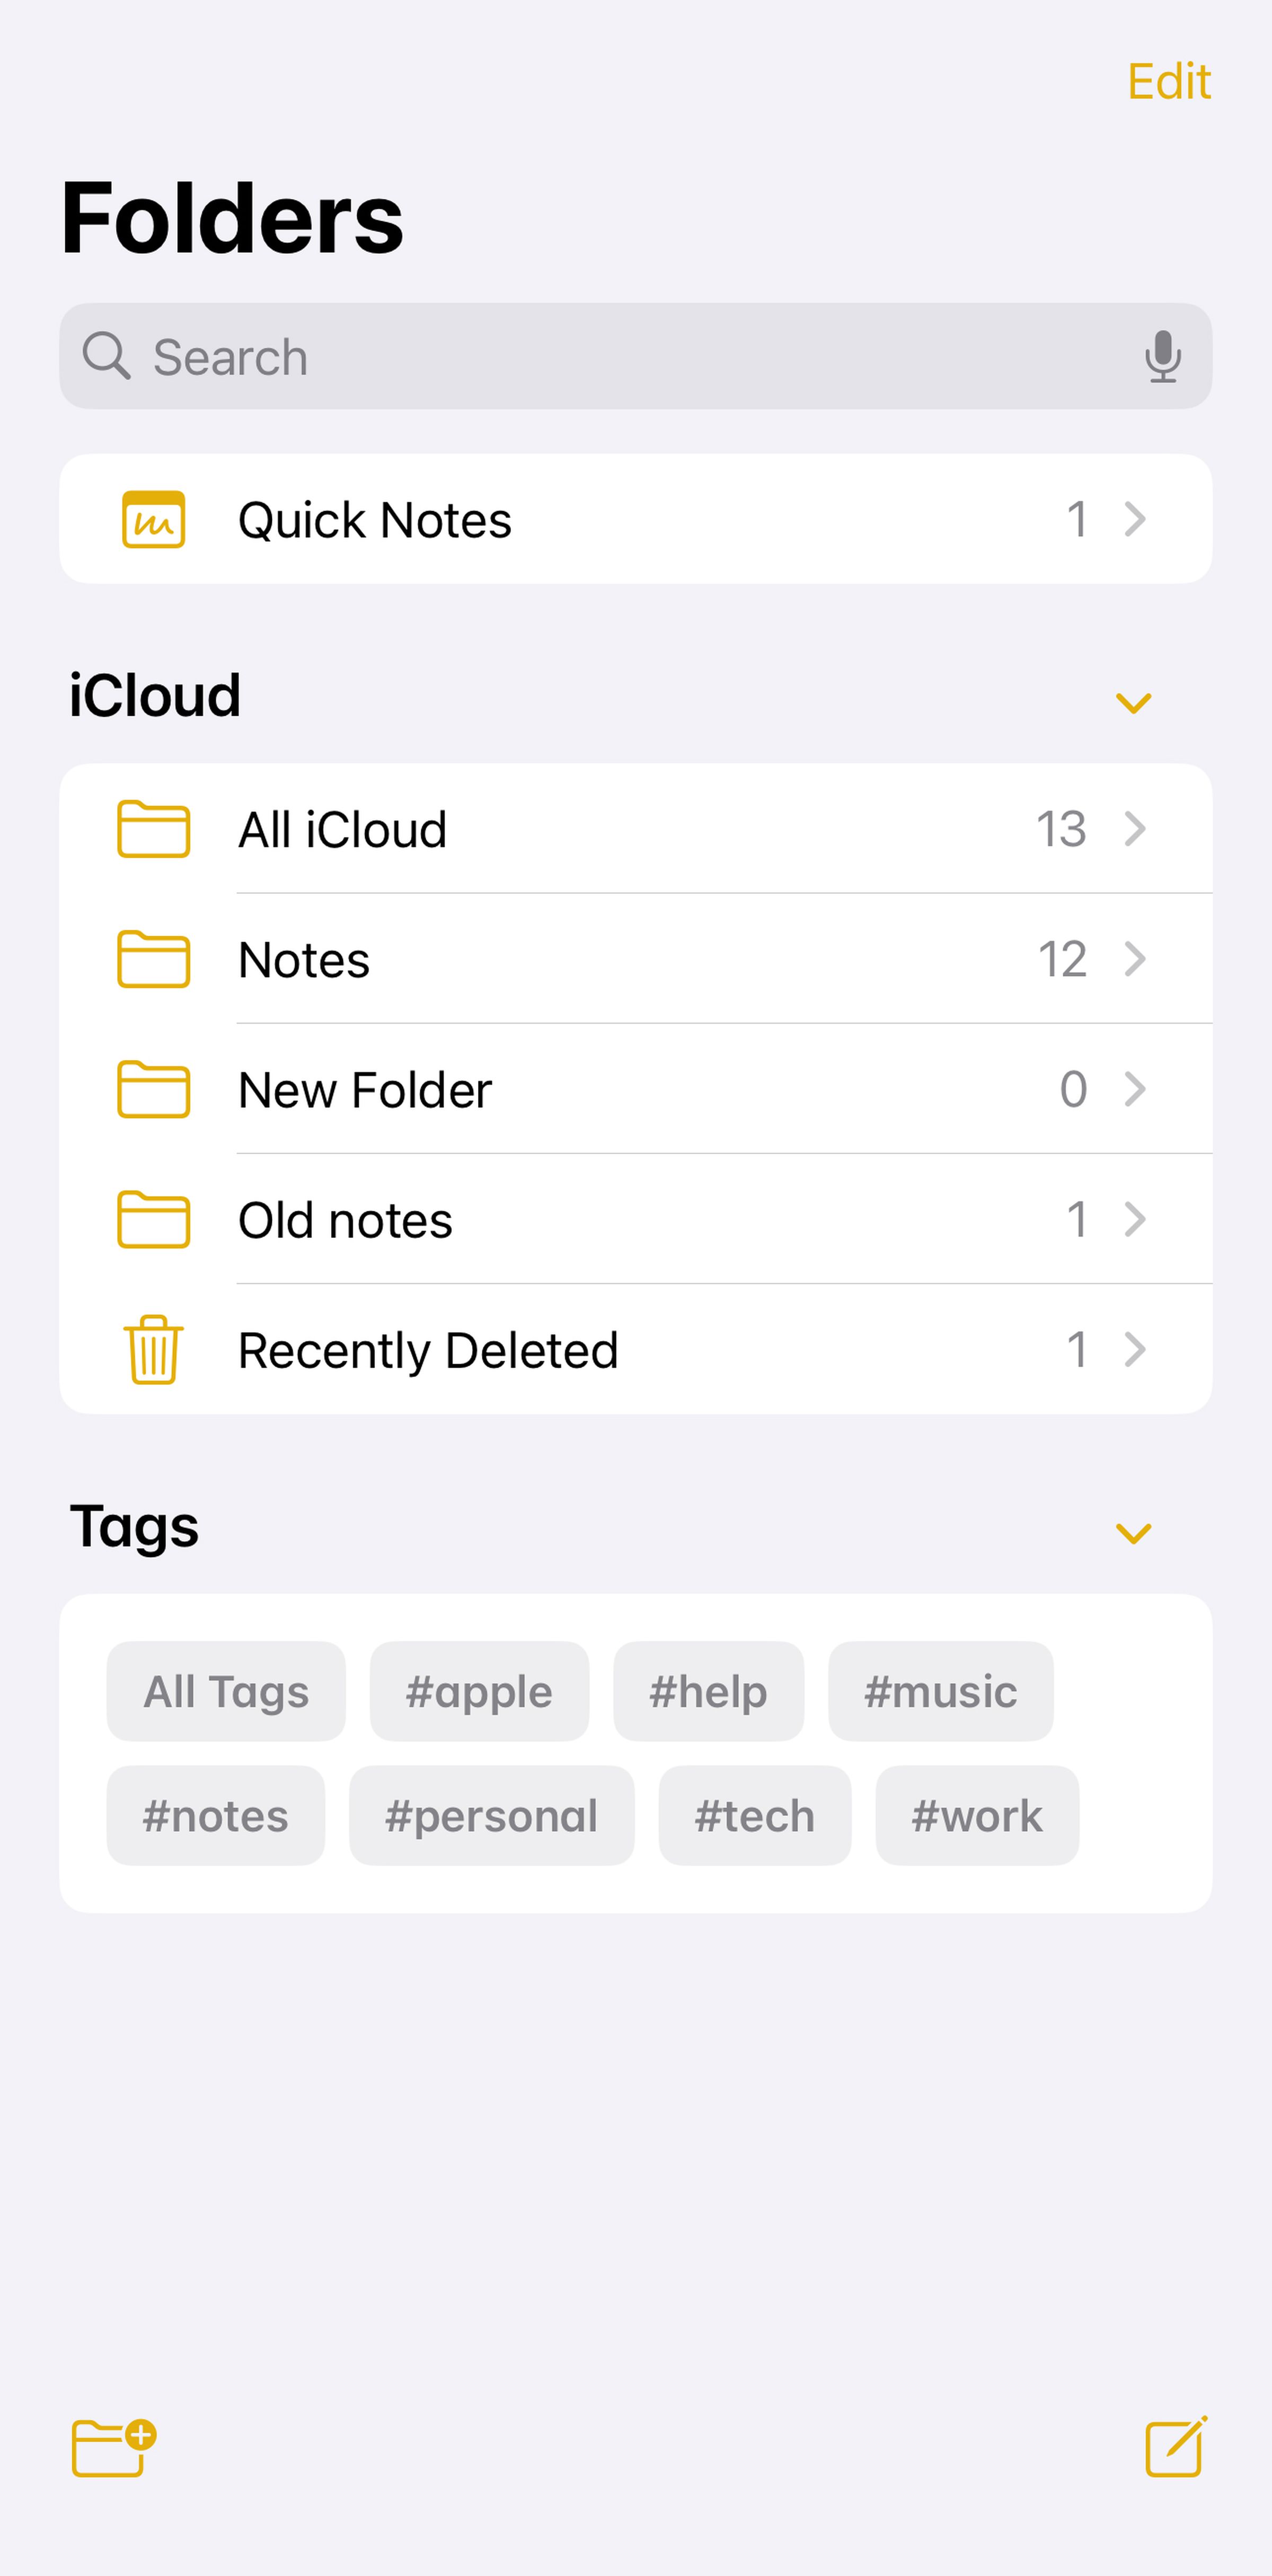 Page headed Folders and including lists from iCloud and Tags.